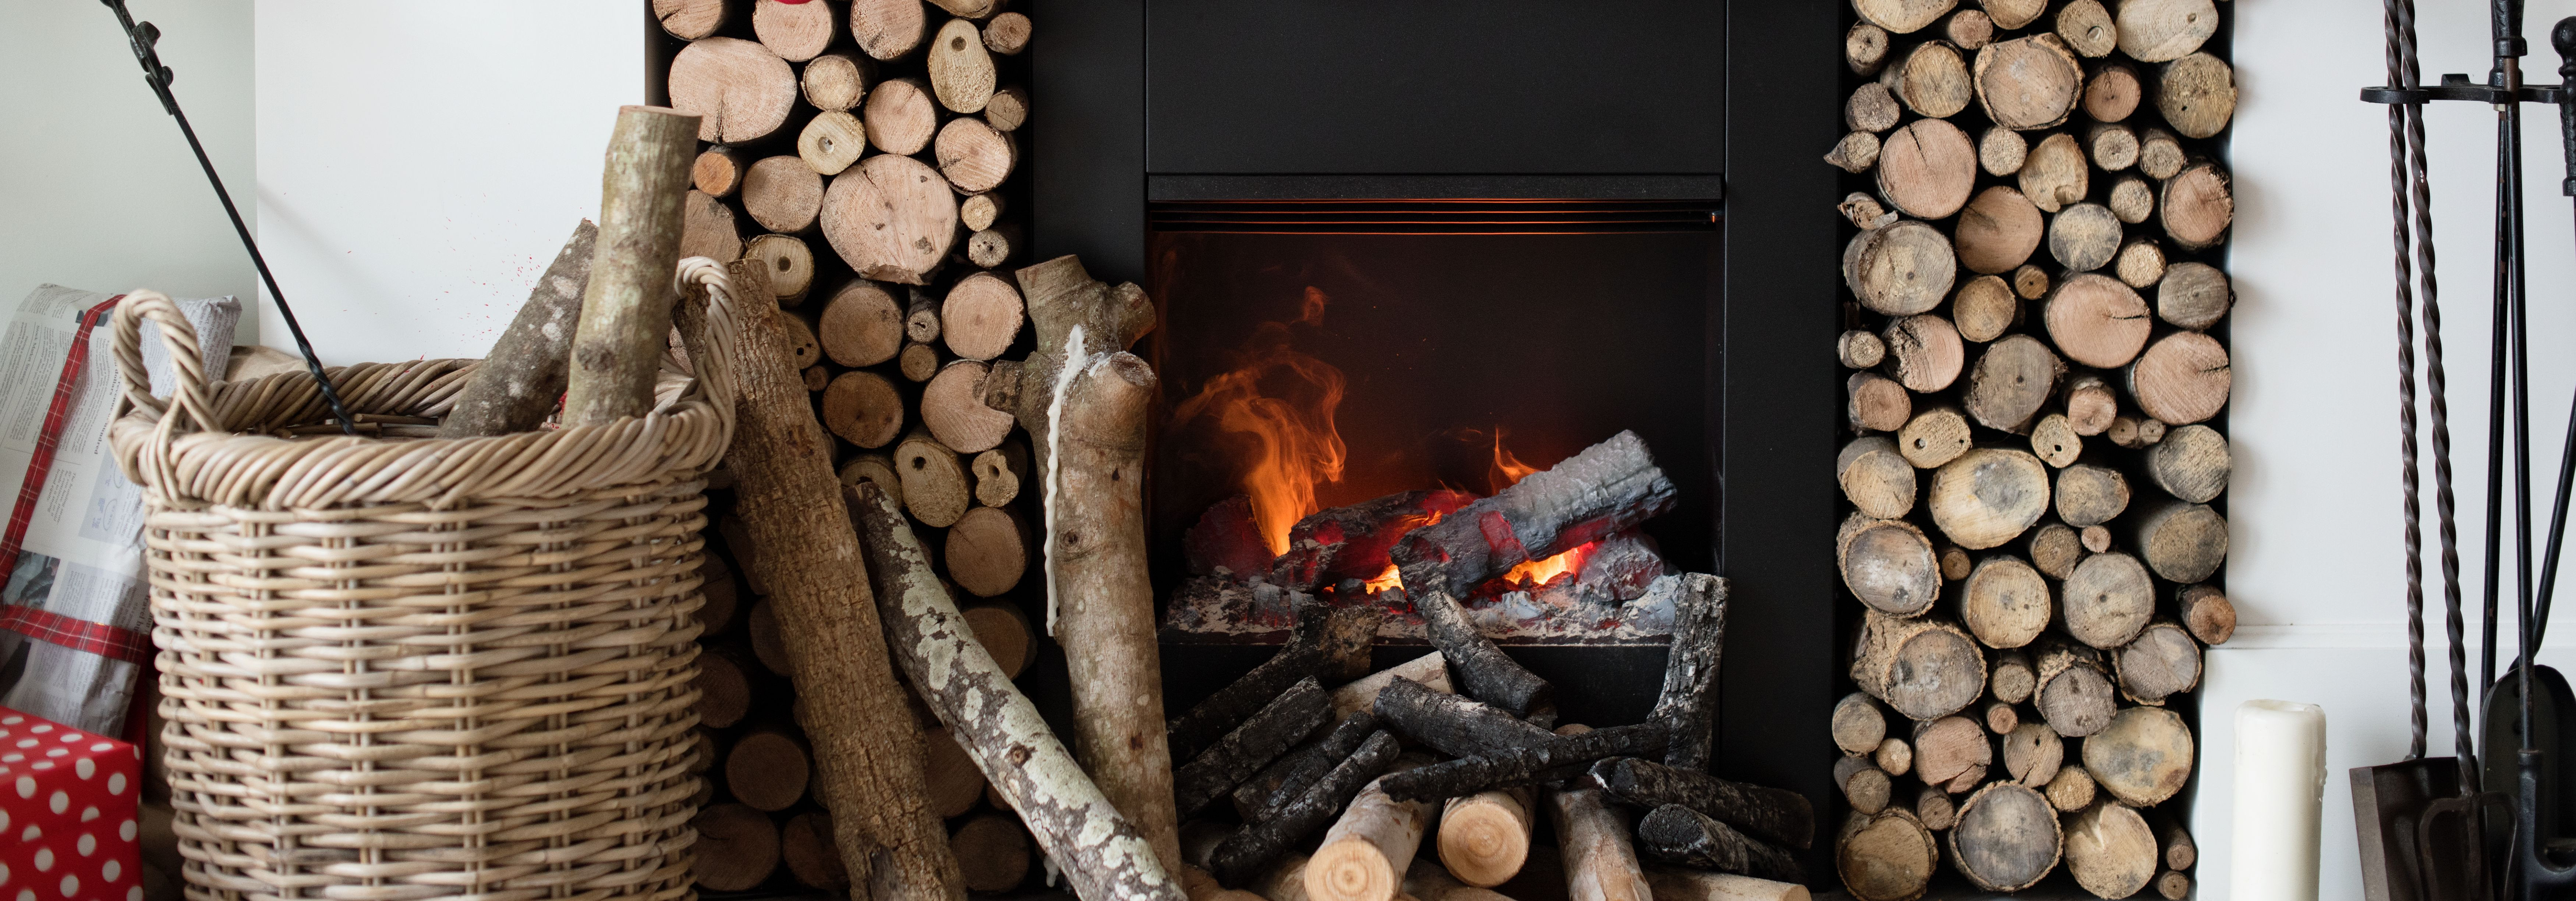 At the heart of every home is the hearth, a source of warmth, comfort, and cherished memories. This is where KORSTNAKODA OÜ ignites its passion for crafting the